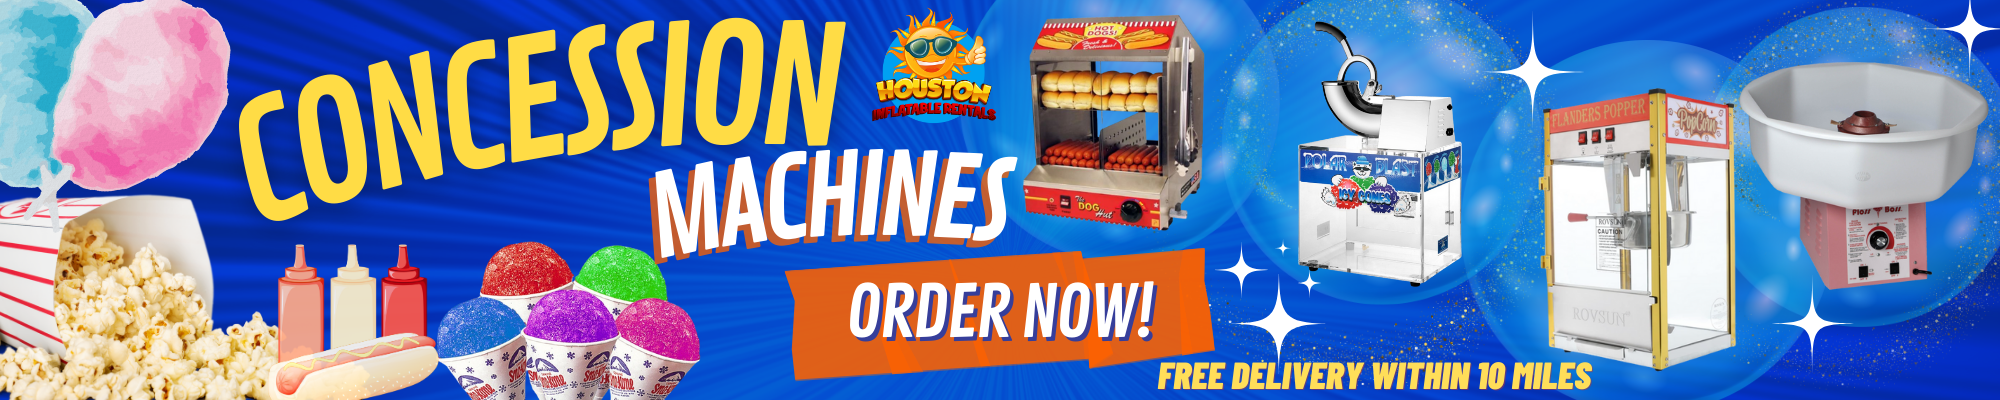 Concession Machines Rental in Humble, TX - Houston Inflatable Rentals - Party Rental - Party Supply - Popcorn - Cotton Candy - Snow Cone - Hot Dog Machine